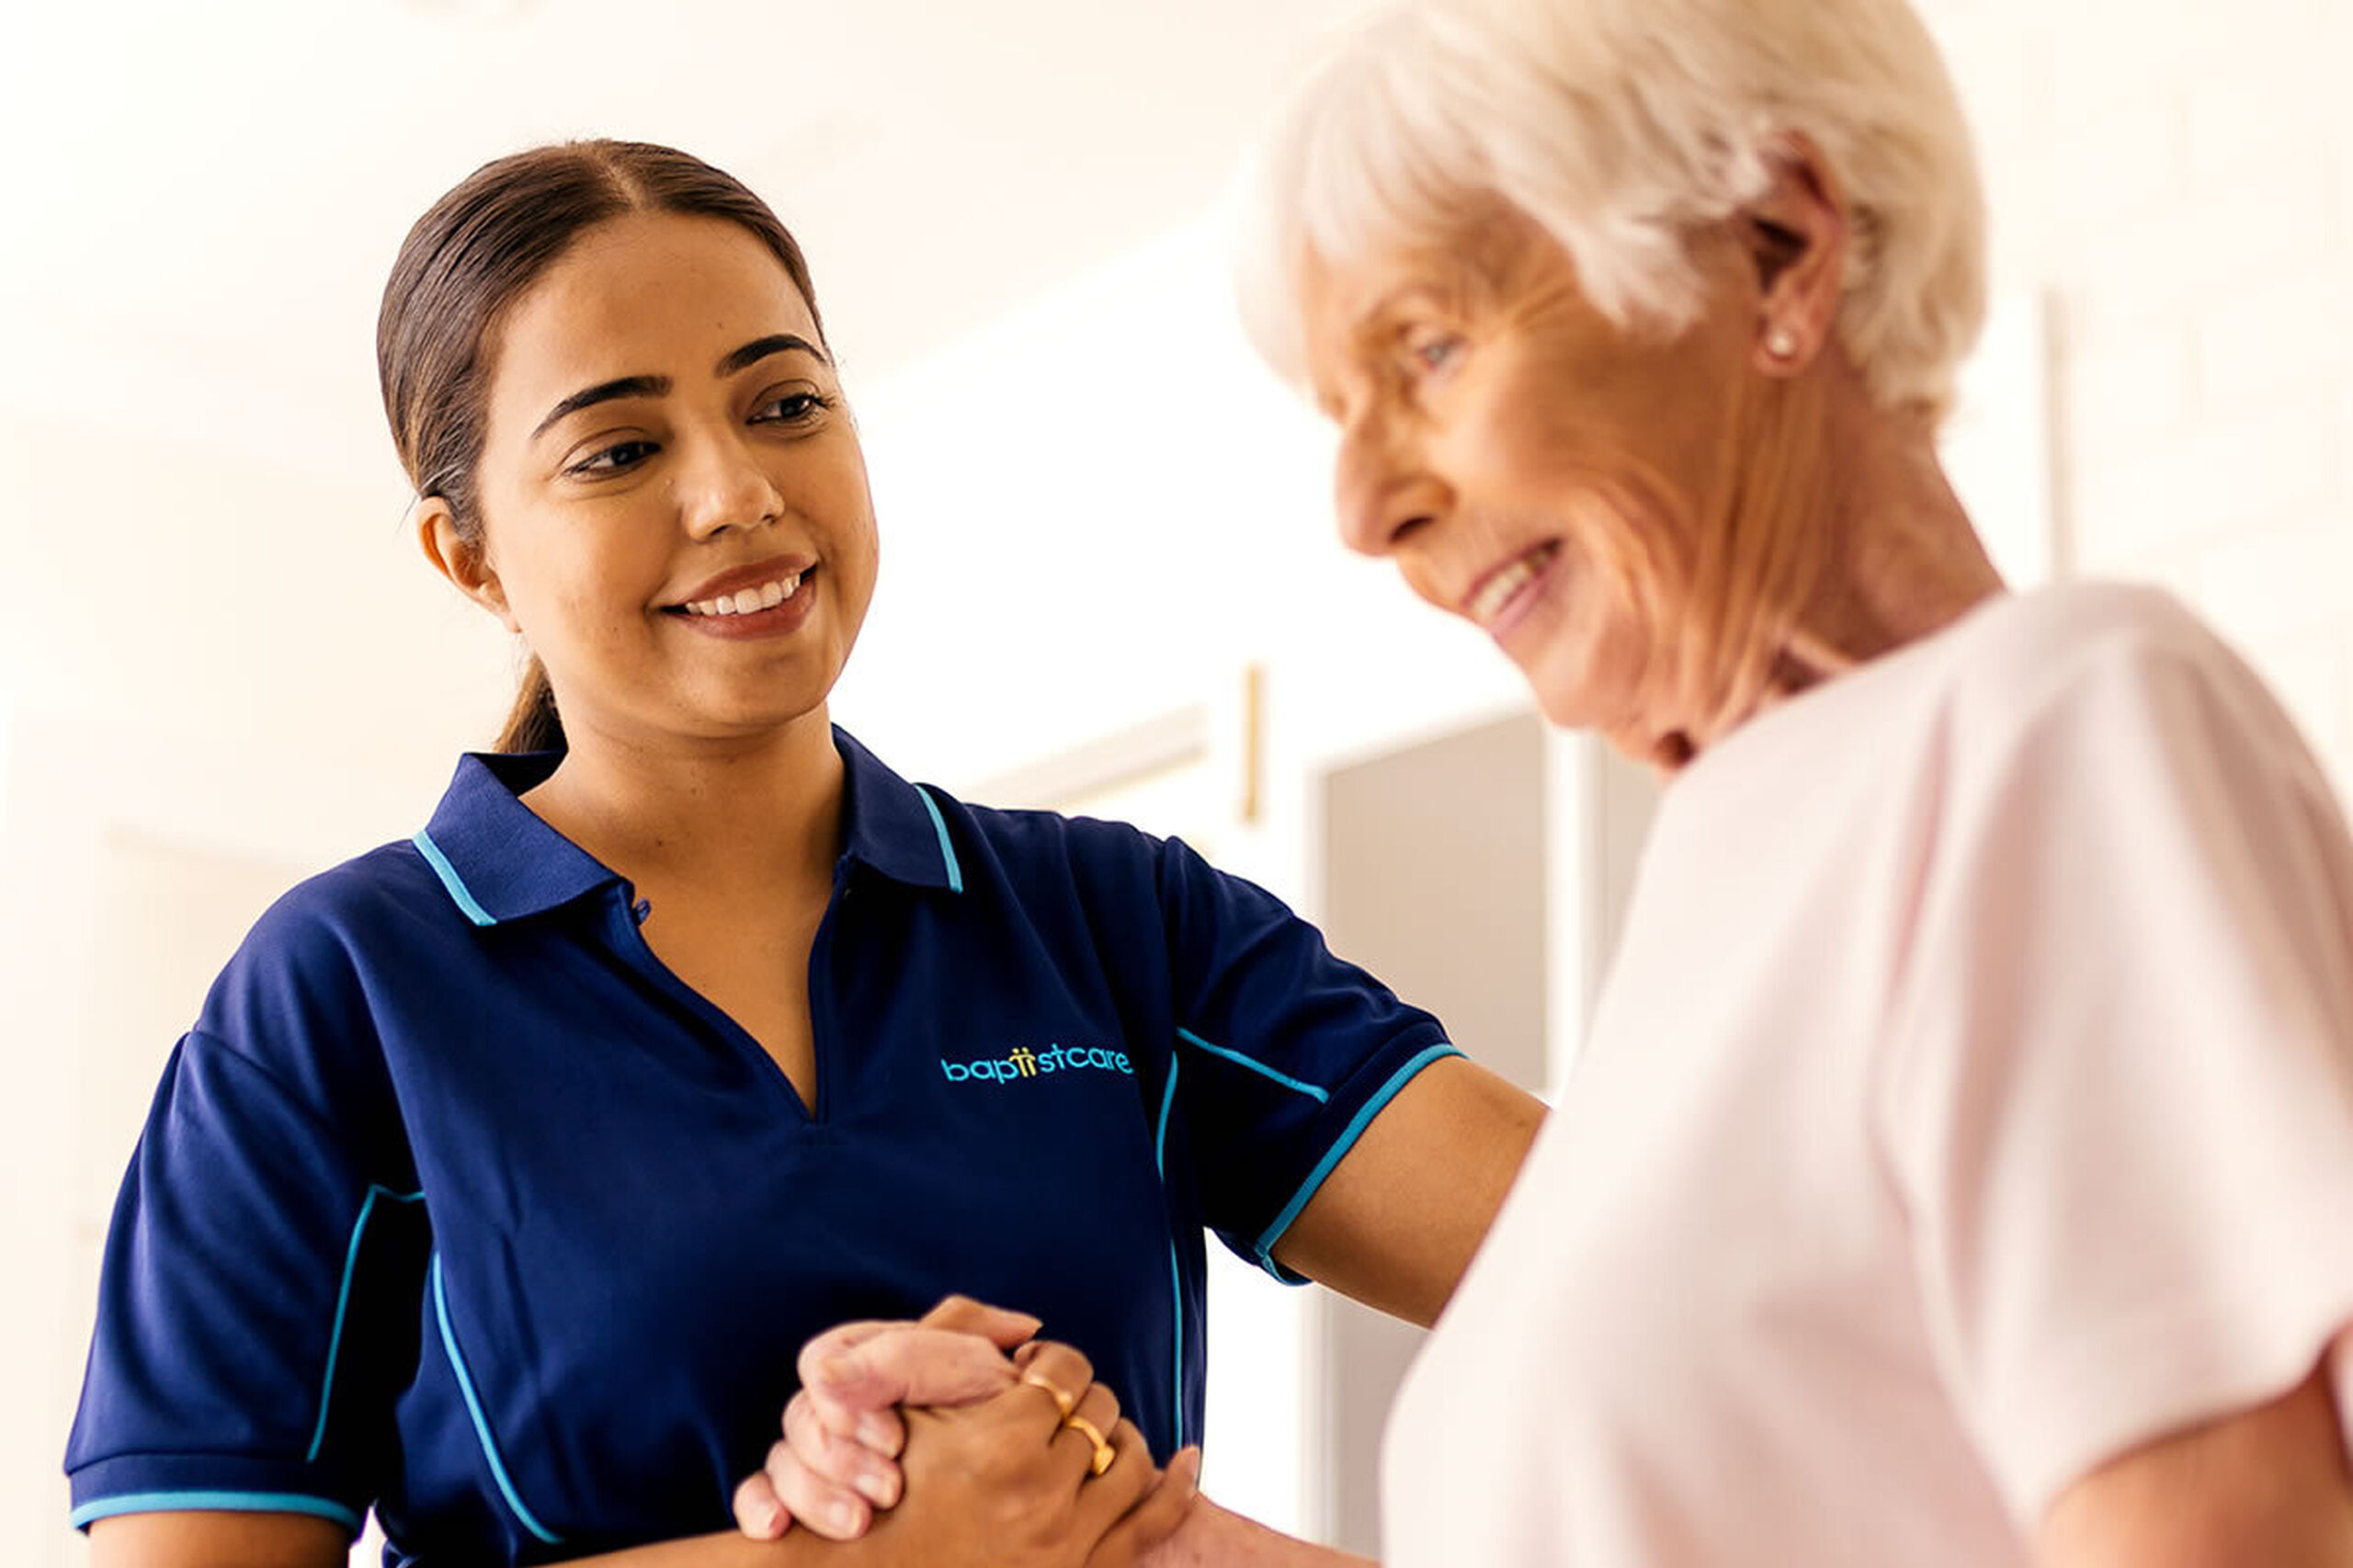 Quick guide to major reforms in aged care